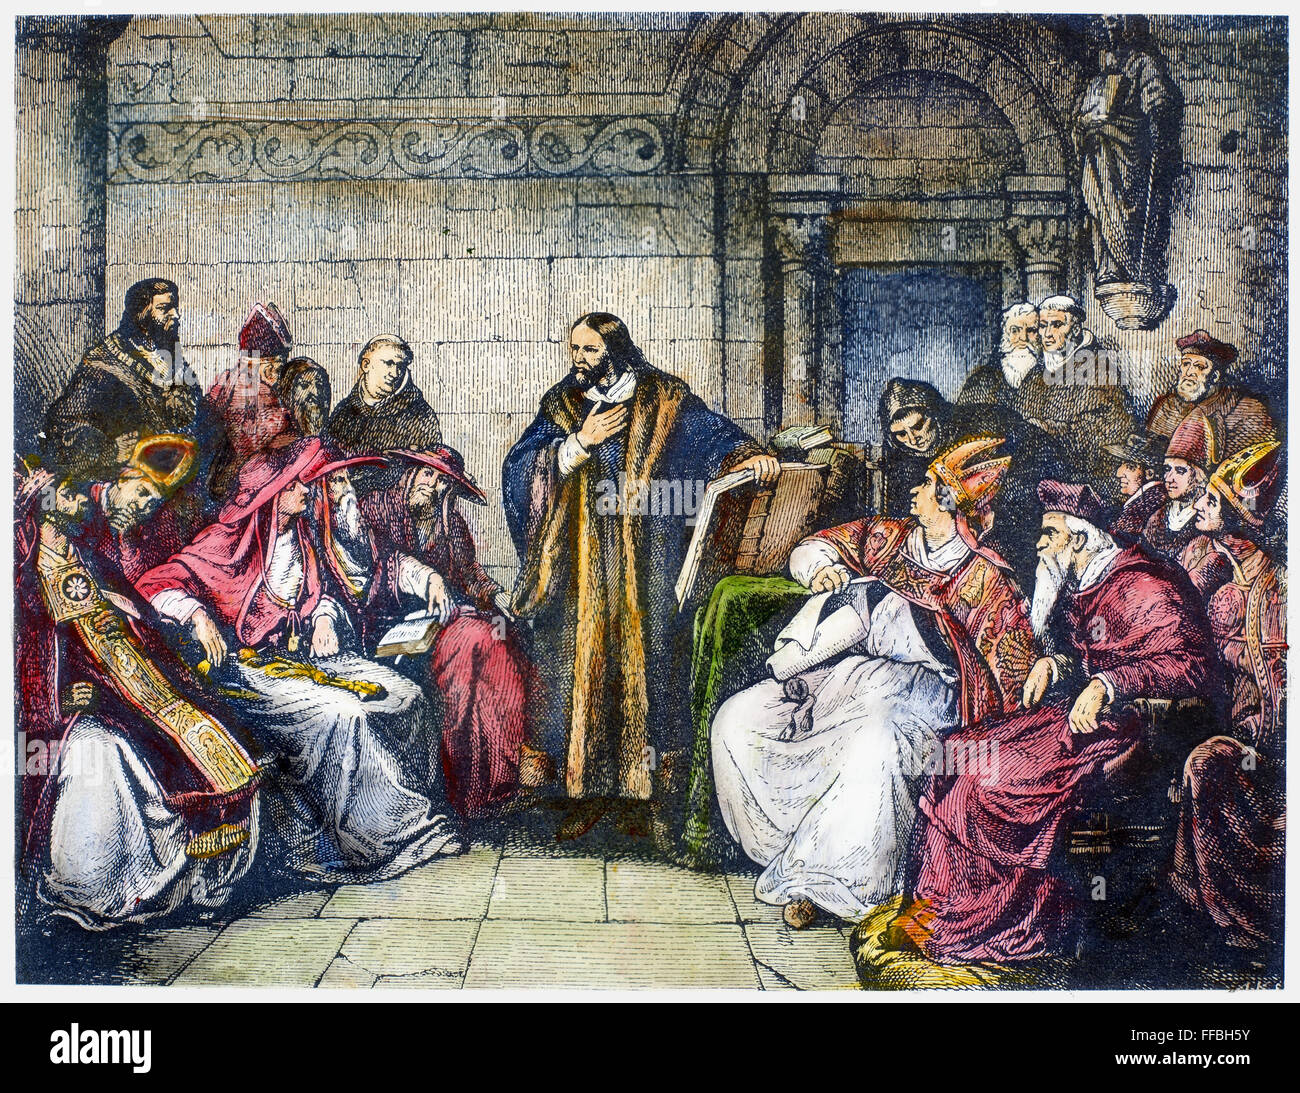 COUNCIL OF CONSTANCE, 1414. /nBohemian religious reformer Jan Hus (c1369-1415) at the Council of Constance, 1414. Wood engraving, 19th century. Stock Photo